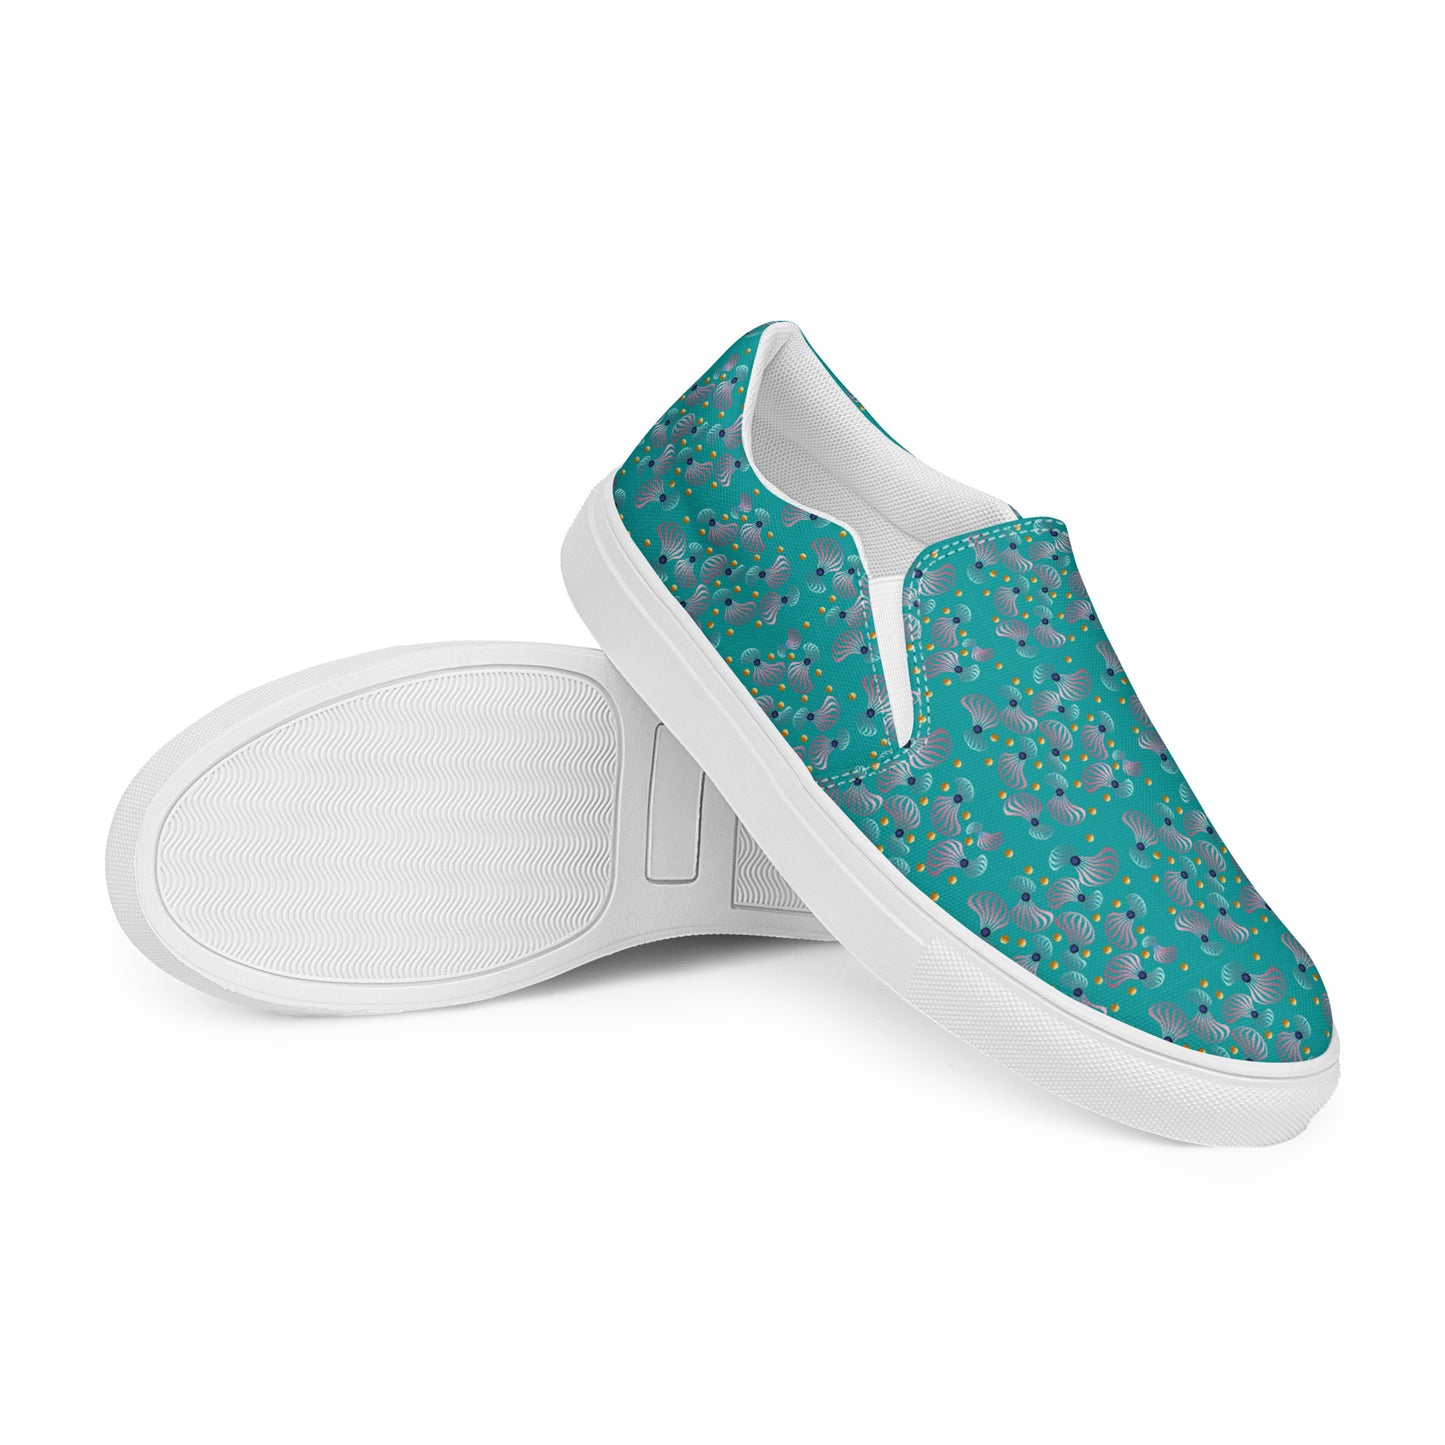 Women’s slip-on canvas shoes Kukloso Whimsical No 83 Pink/Aqua/Navy Spirials on Turquoise - Free Shipping